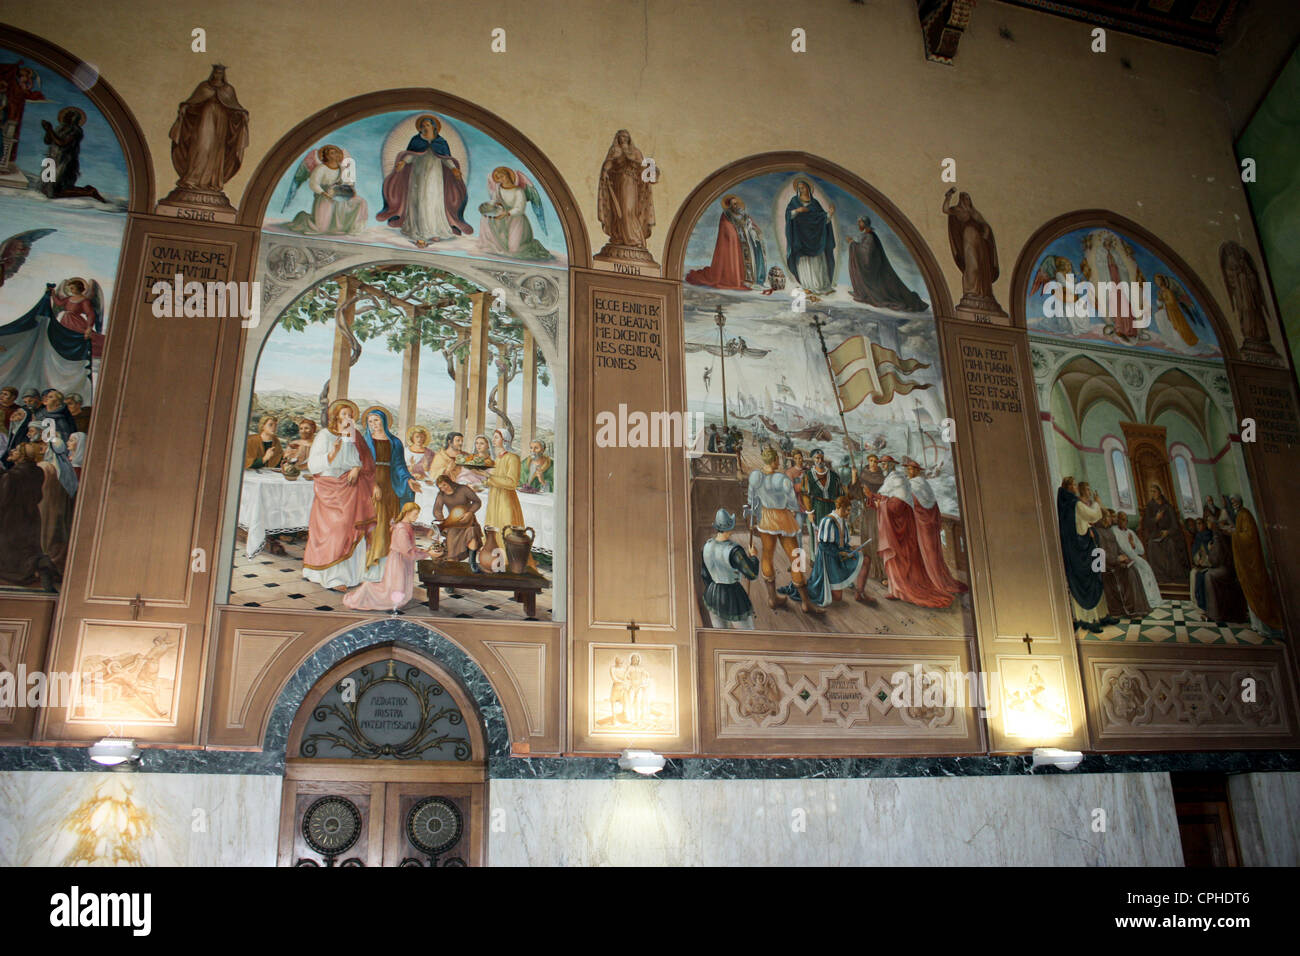 Artwork and paintings inside Church of the Visitation located at Ein Kerem Israel Stock Photo